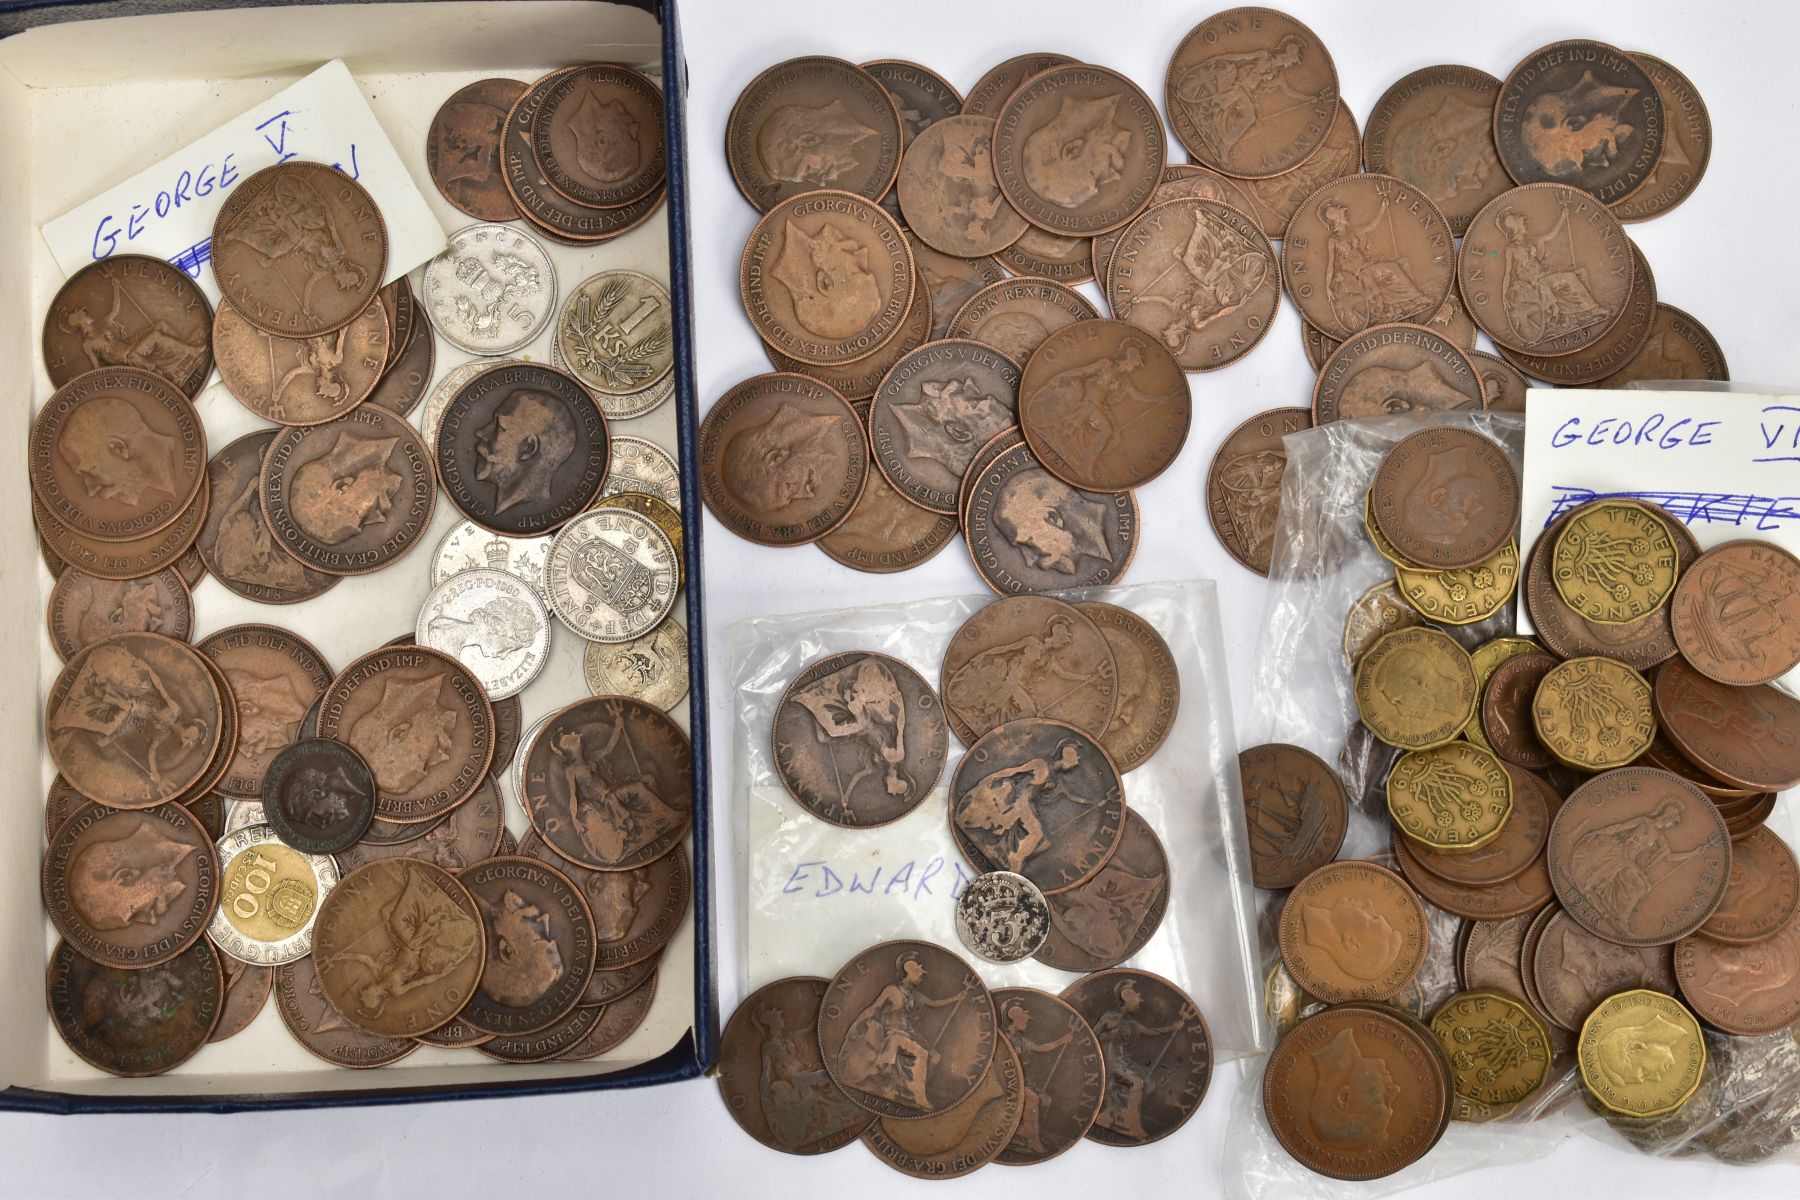 A BOX CONTAINING MOSTLY UK COPPER COINS